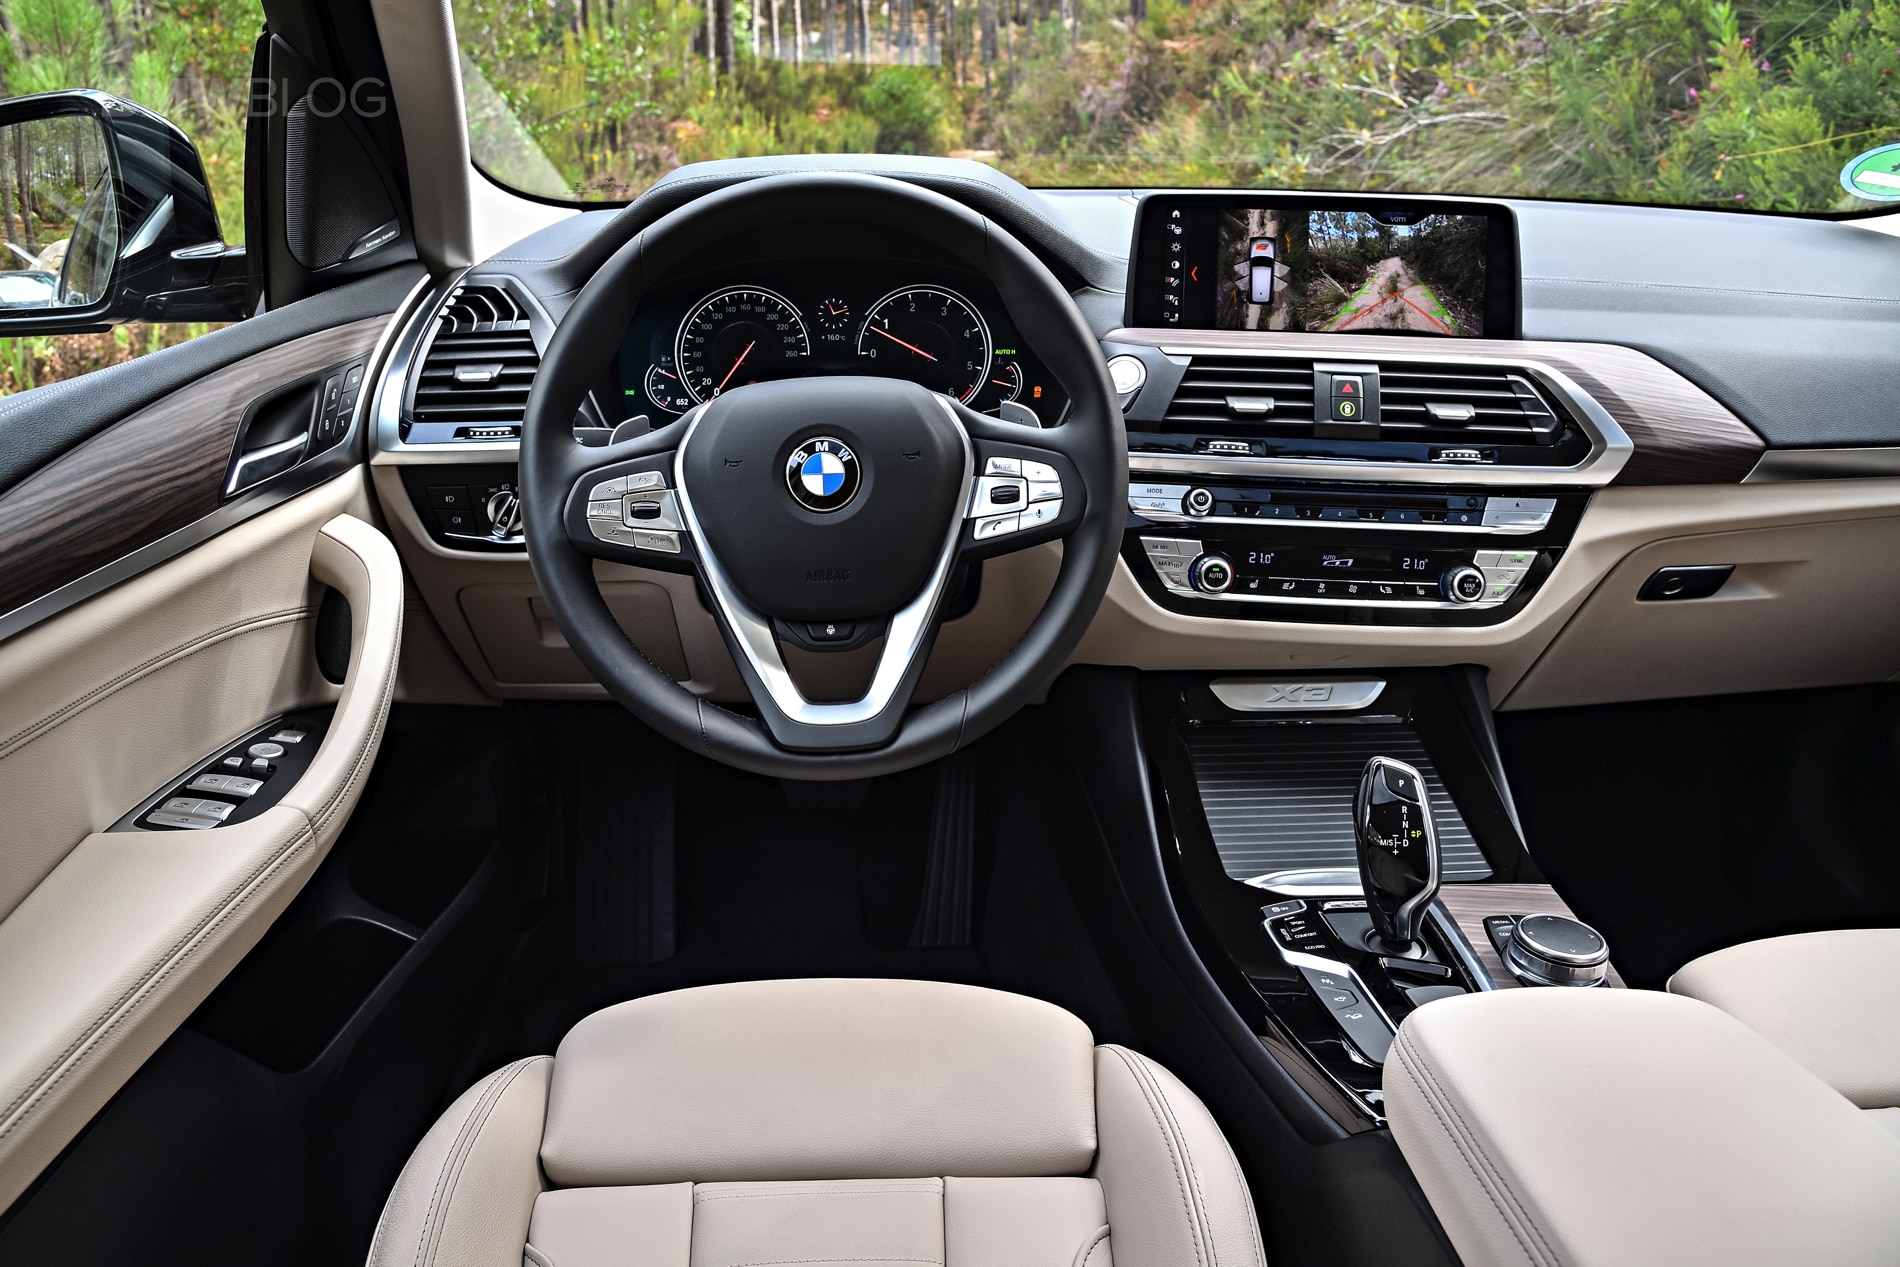 Some BMW models will lose touchscreen functionality.  Why?